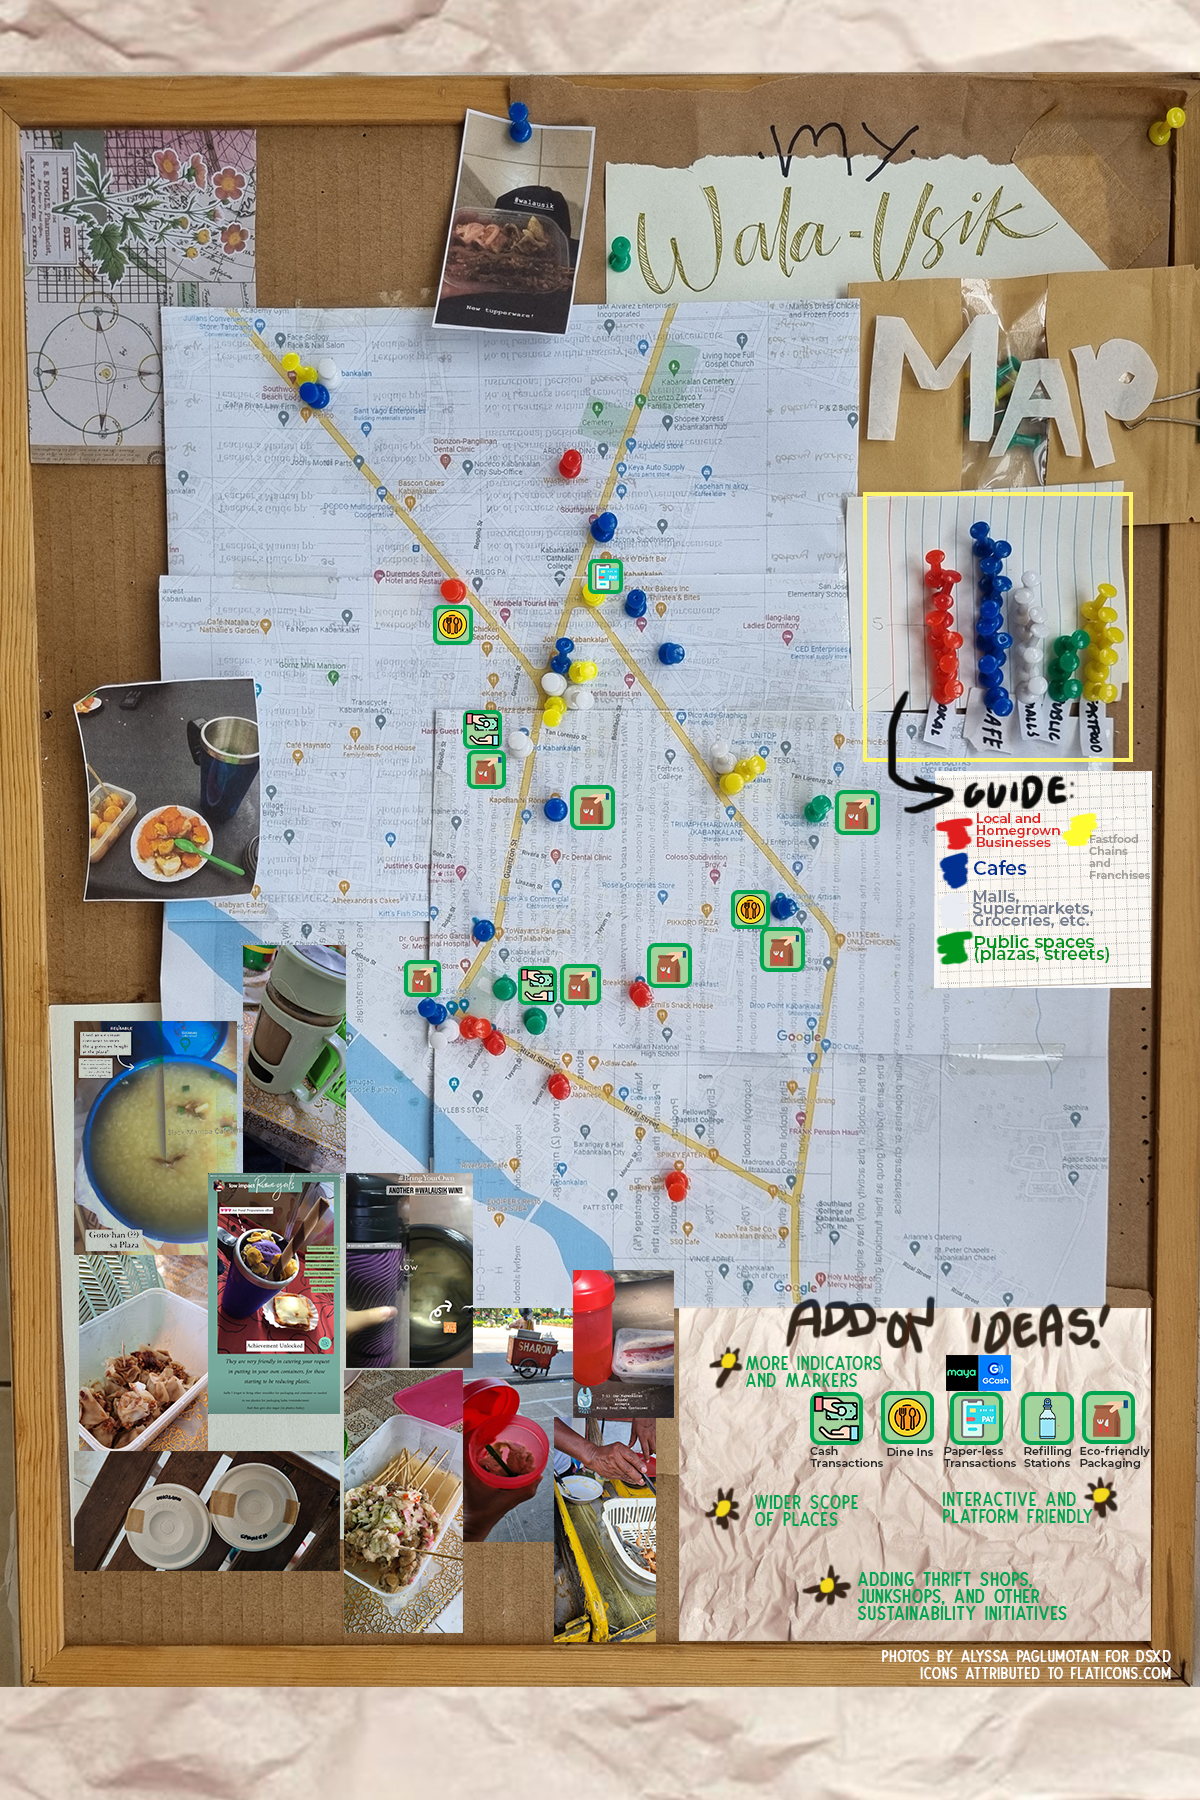 A cardboard board made as a physical map titled 'My Wala Usik Map' with each place in the select portion of Kabankalan mapped with a pin of specific color as indicator (red for local and homegrown establishments, blue for Cafes ,white for shopping establishment (malls, groceries etc.) green for public spaces like plaza and streets, and yellow for fast food chains and establishments). Lower left is photos collected of each memory and lower right is the more ideas to be developed and indicators of their eco-practices such as paperless payment, cash, packaging, dining, etc.